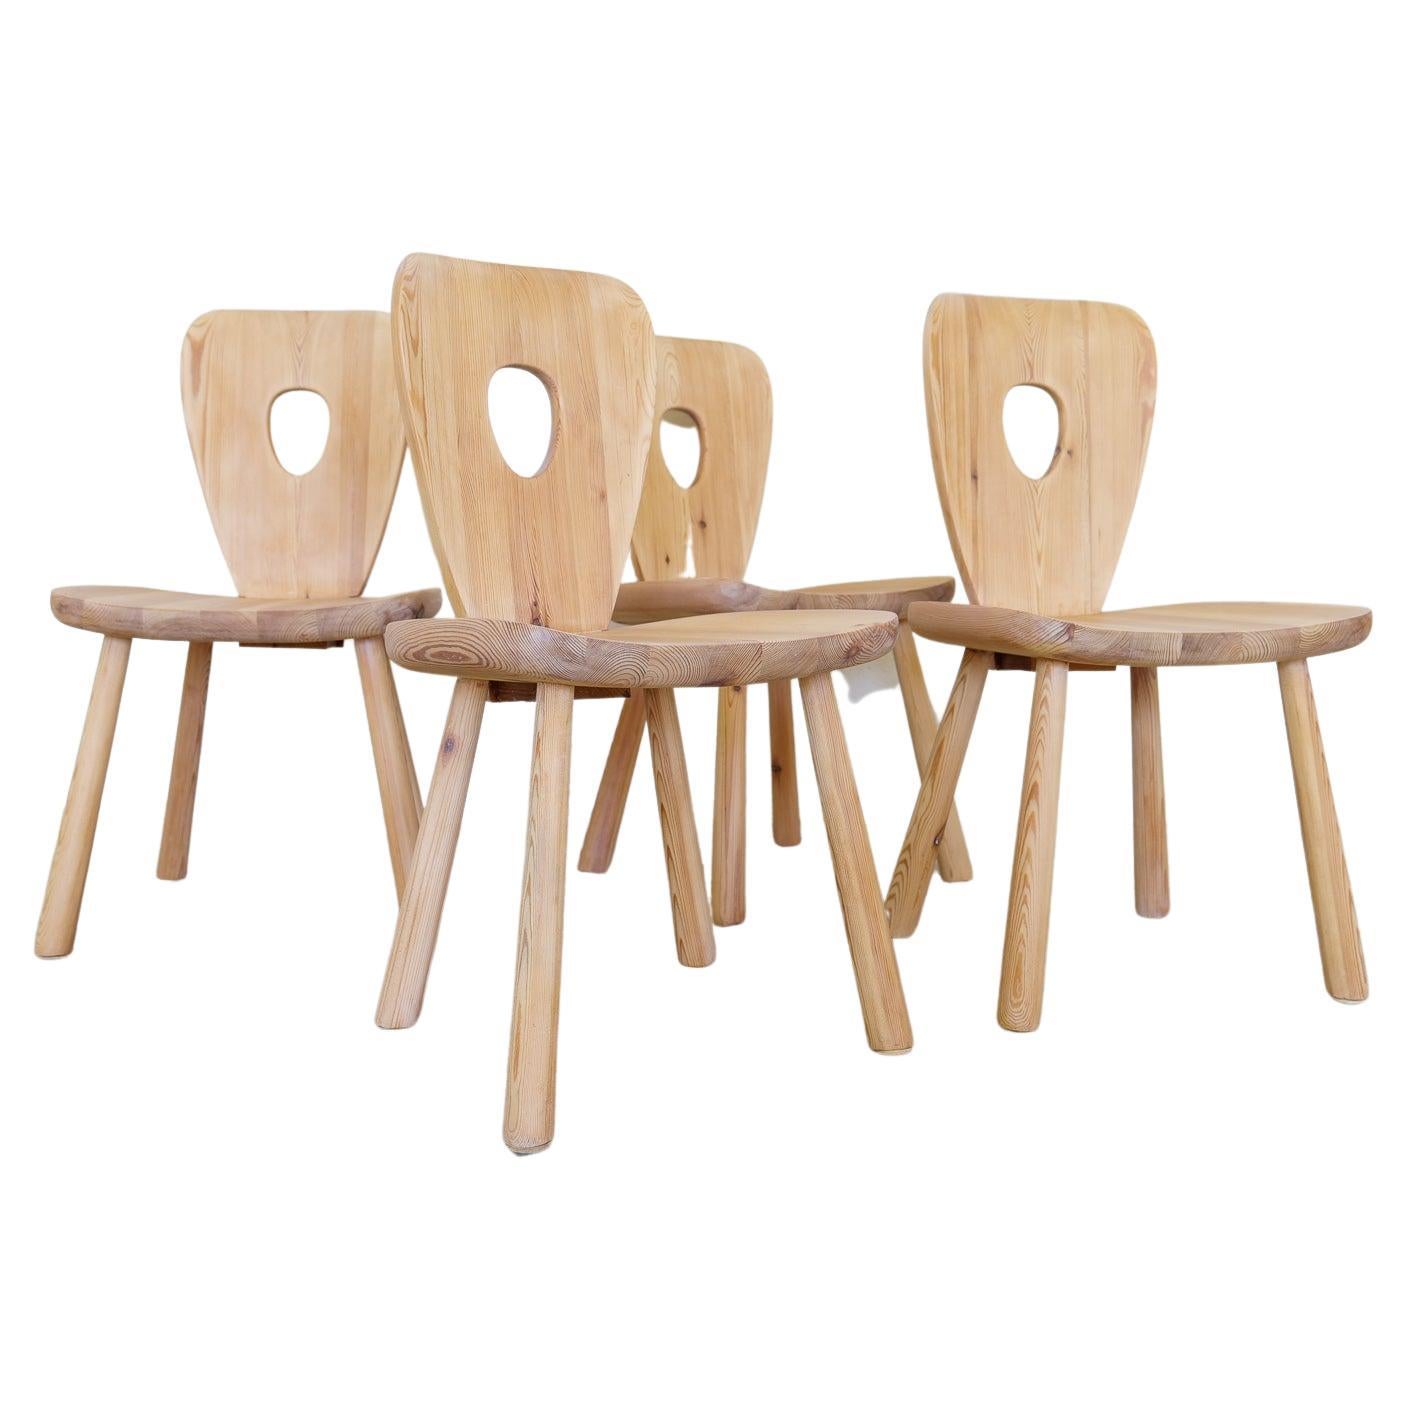 Swedish Sculptural Dining Chairs in Pine Bo Fjaestad, Sweden 1930s